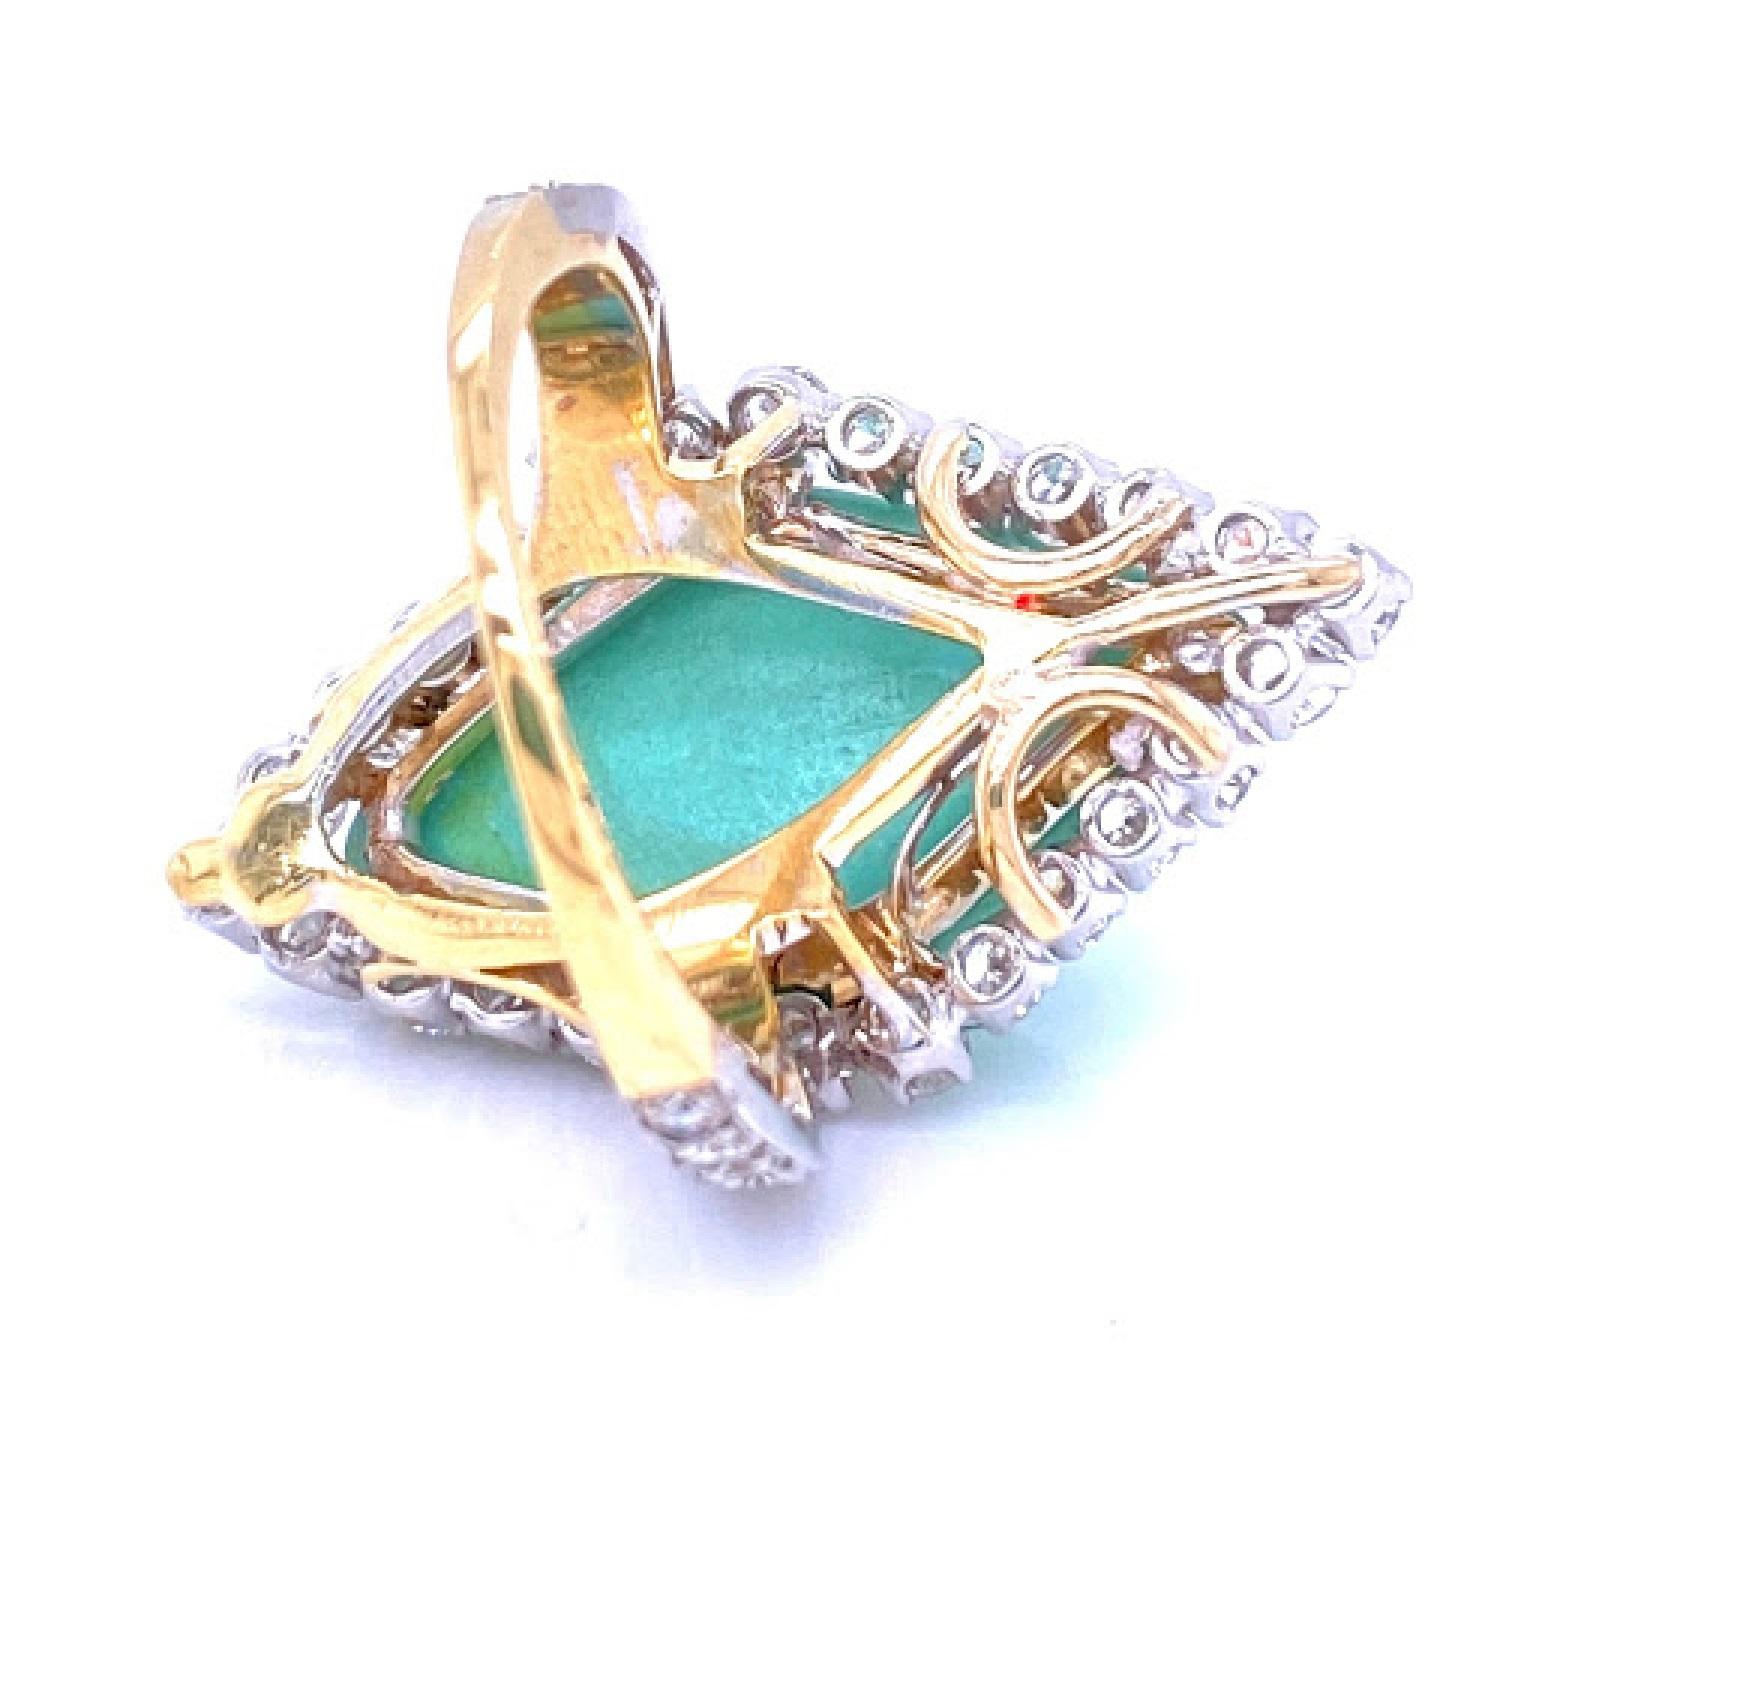 18 karat yellow gold and platinum (not stamped) ring with turquoise center stone measuring 24 mm by 12 mm. There are 38 round brilliant diamonds along the shank of the ring as well as the halo. The diamonds weigh approximately 1.50 carat total